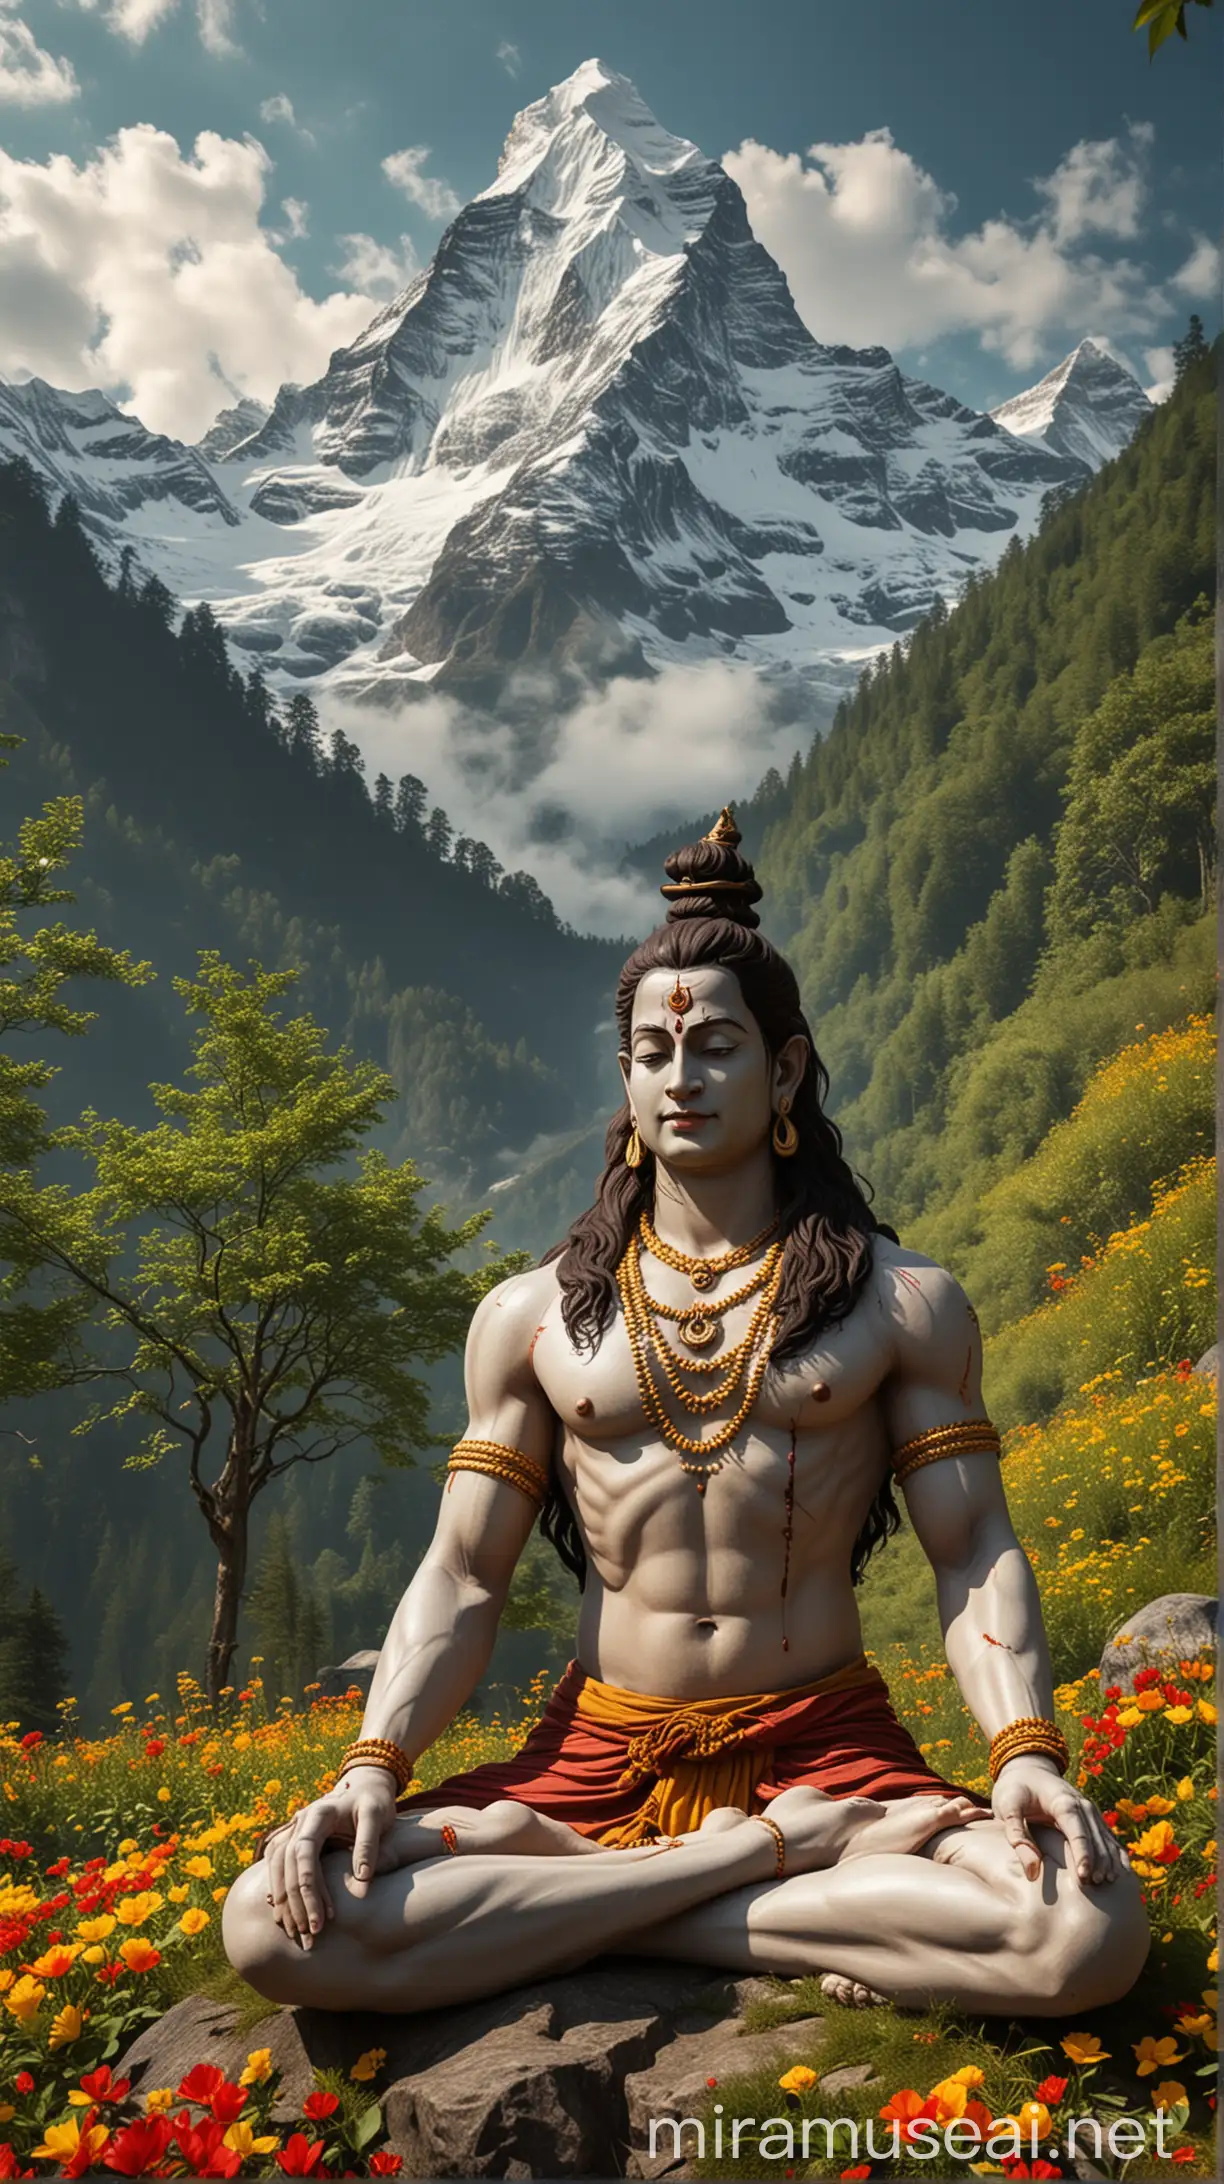 Lord Shiva Meditating on Verdant Mountain Amidst Colorful Flowers